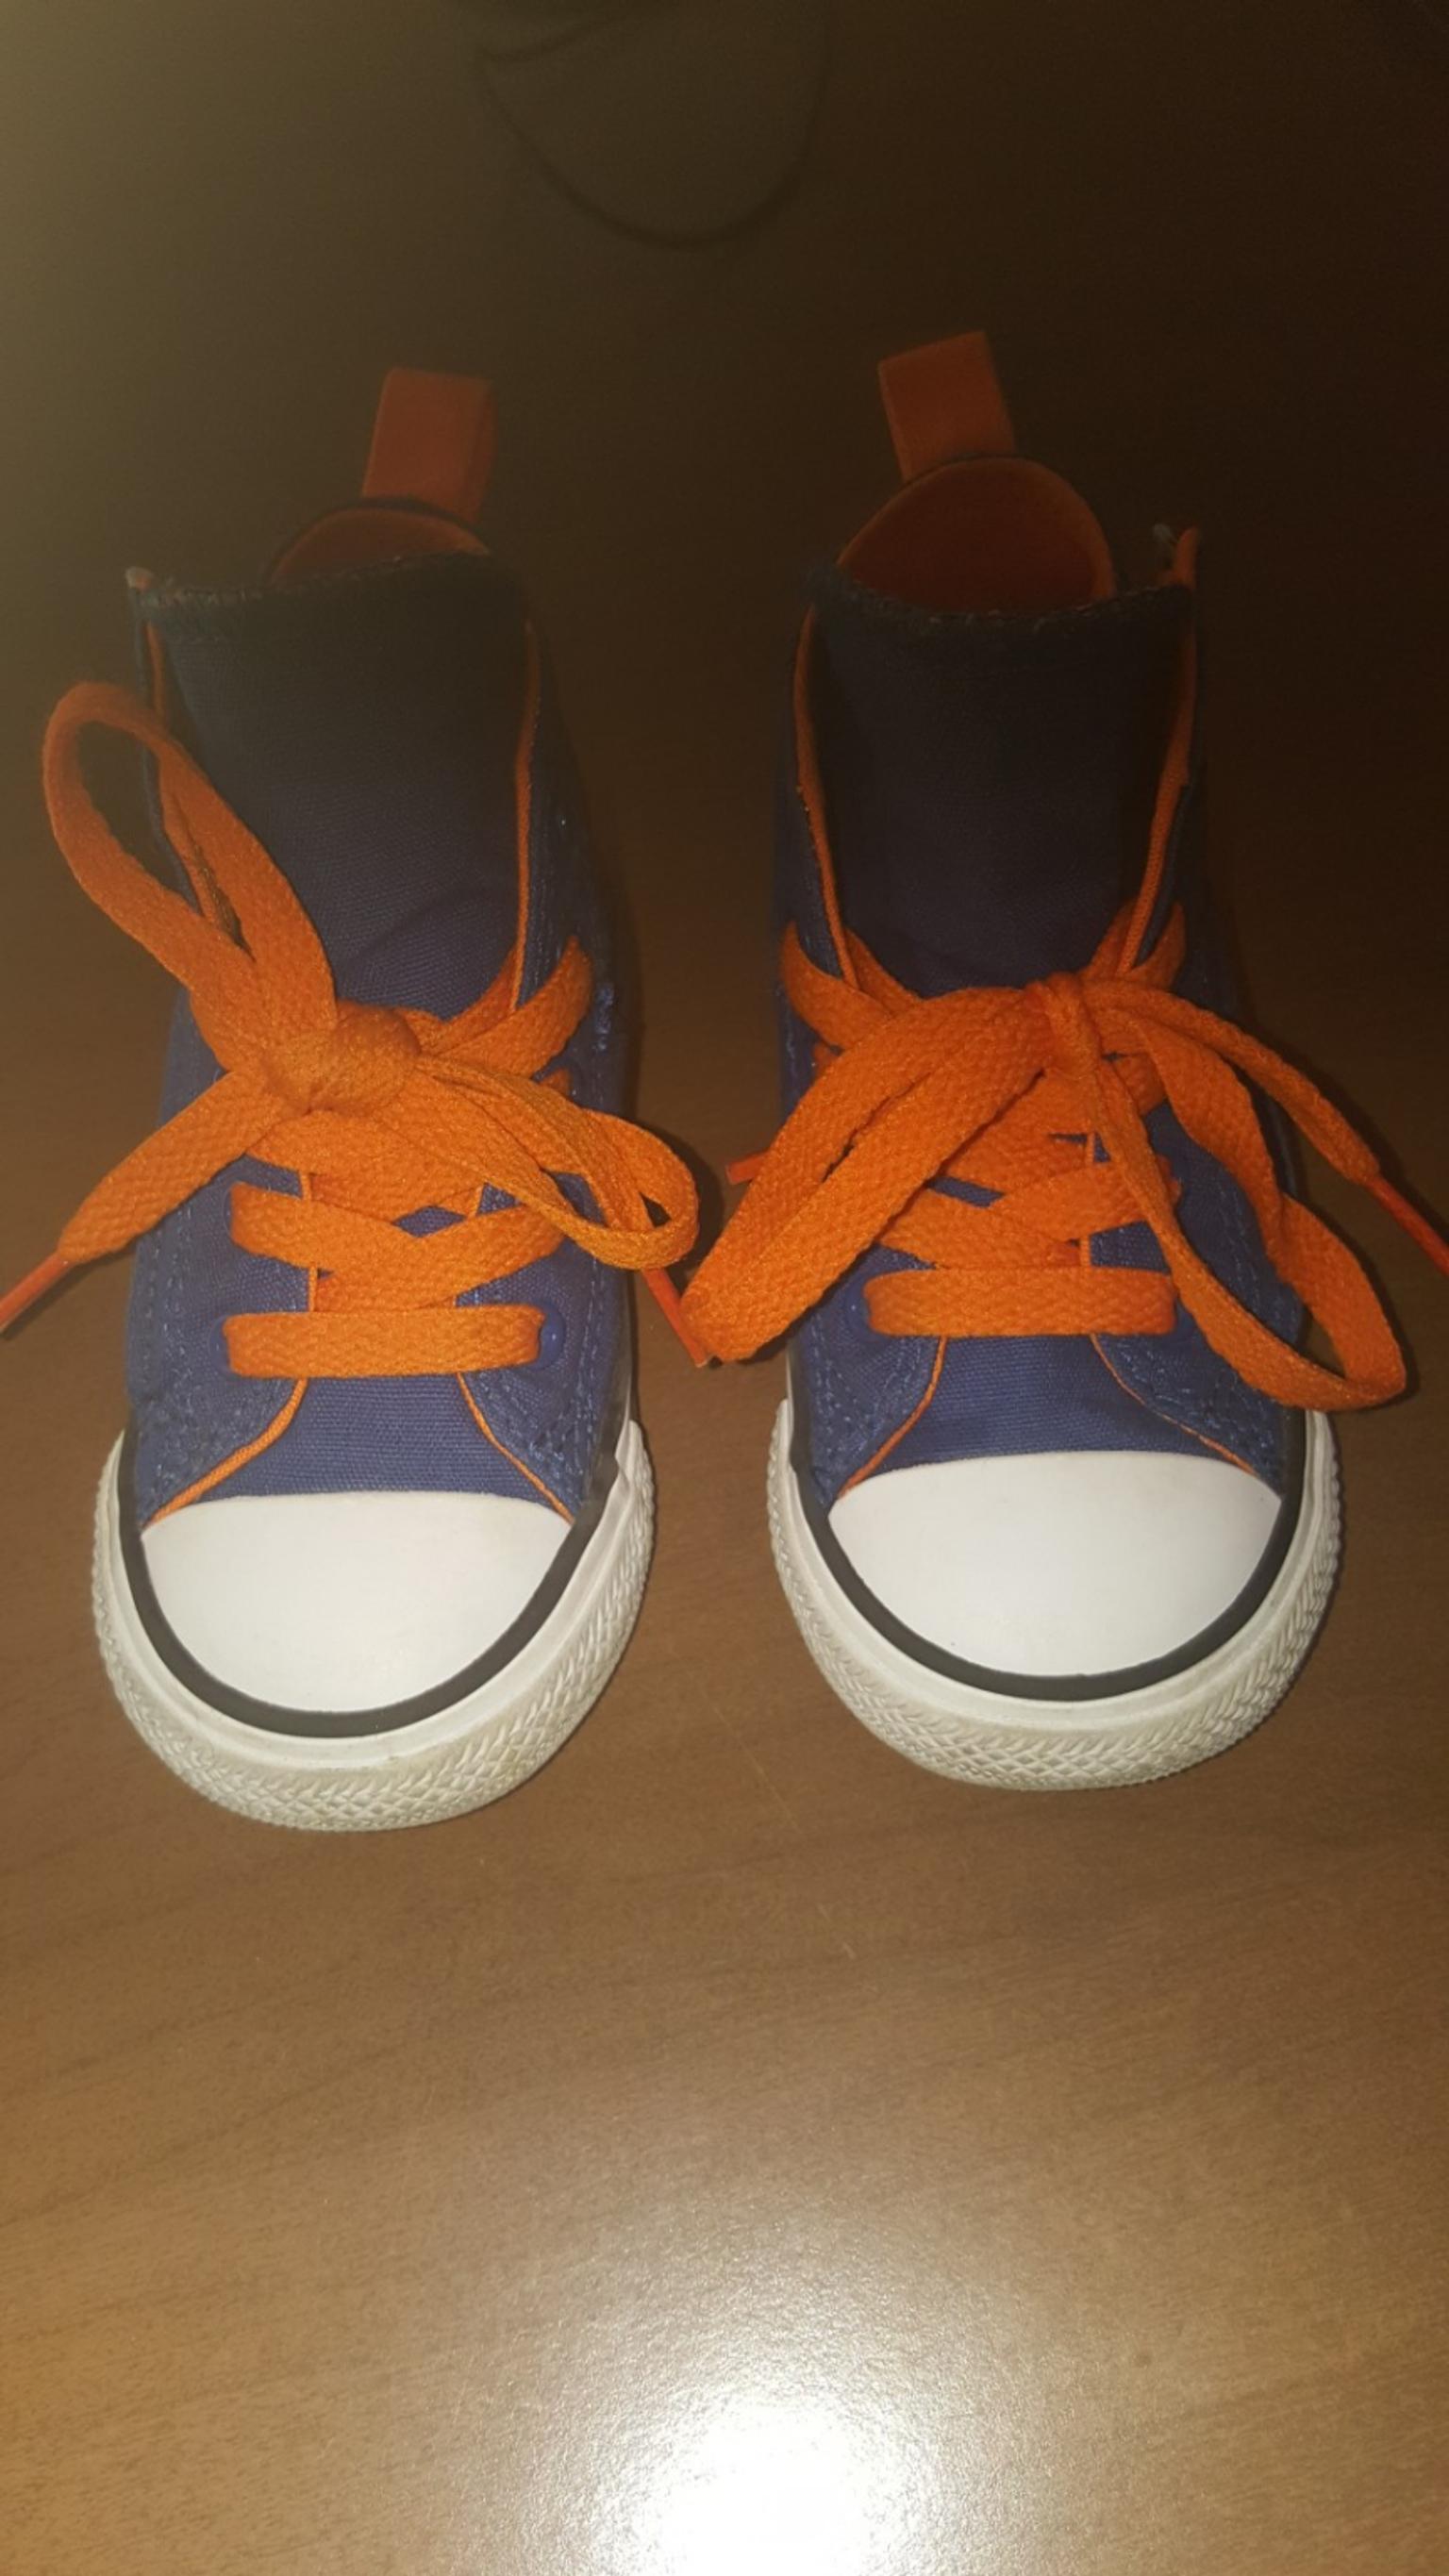 converse all star numero 22 in 00169 Roma for €10.00 for sale | Shpock